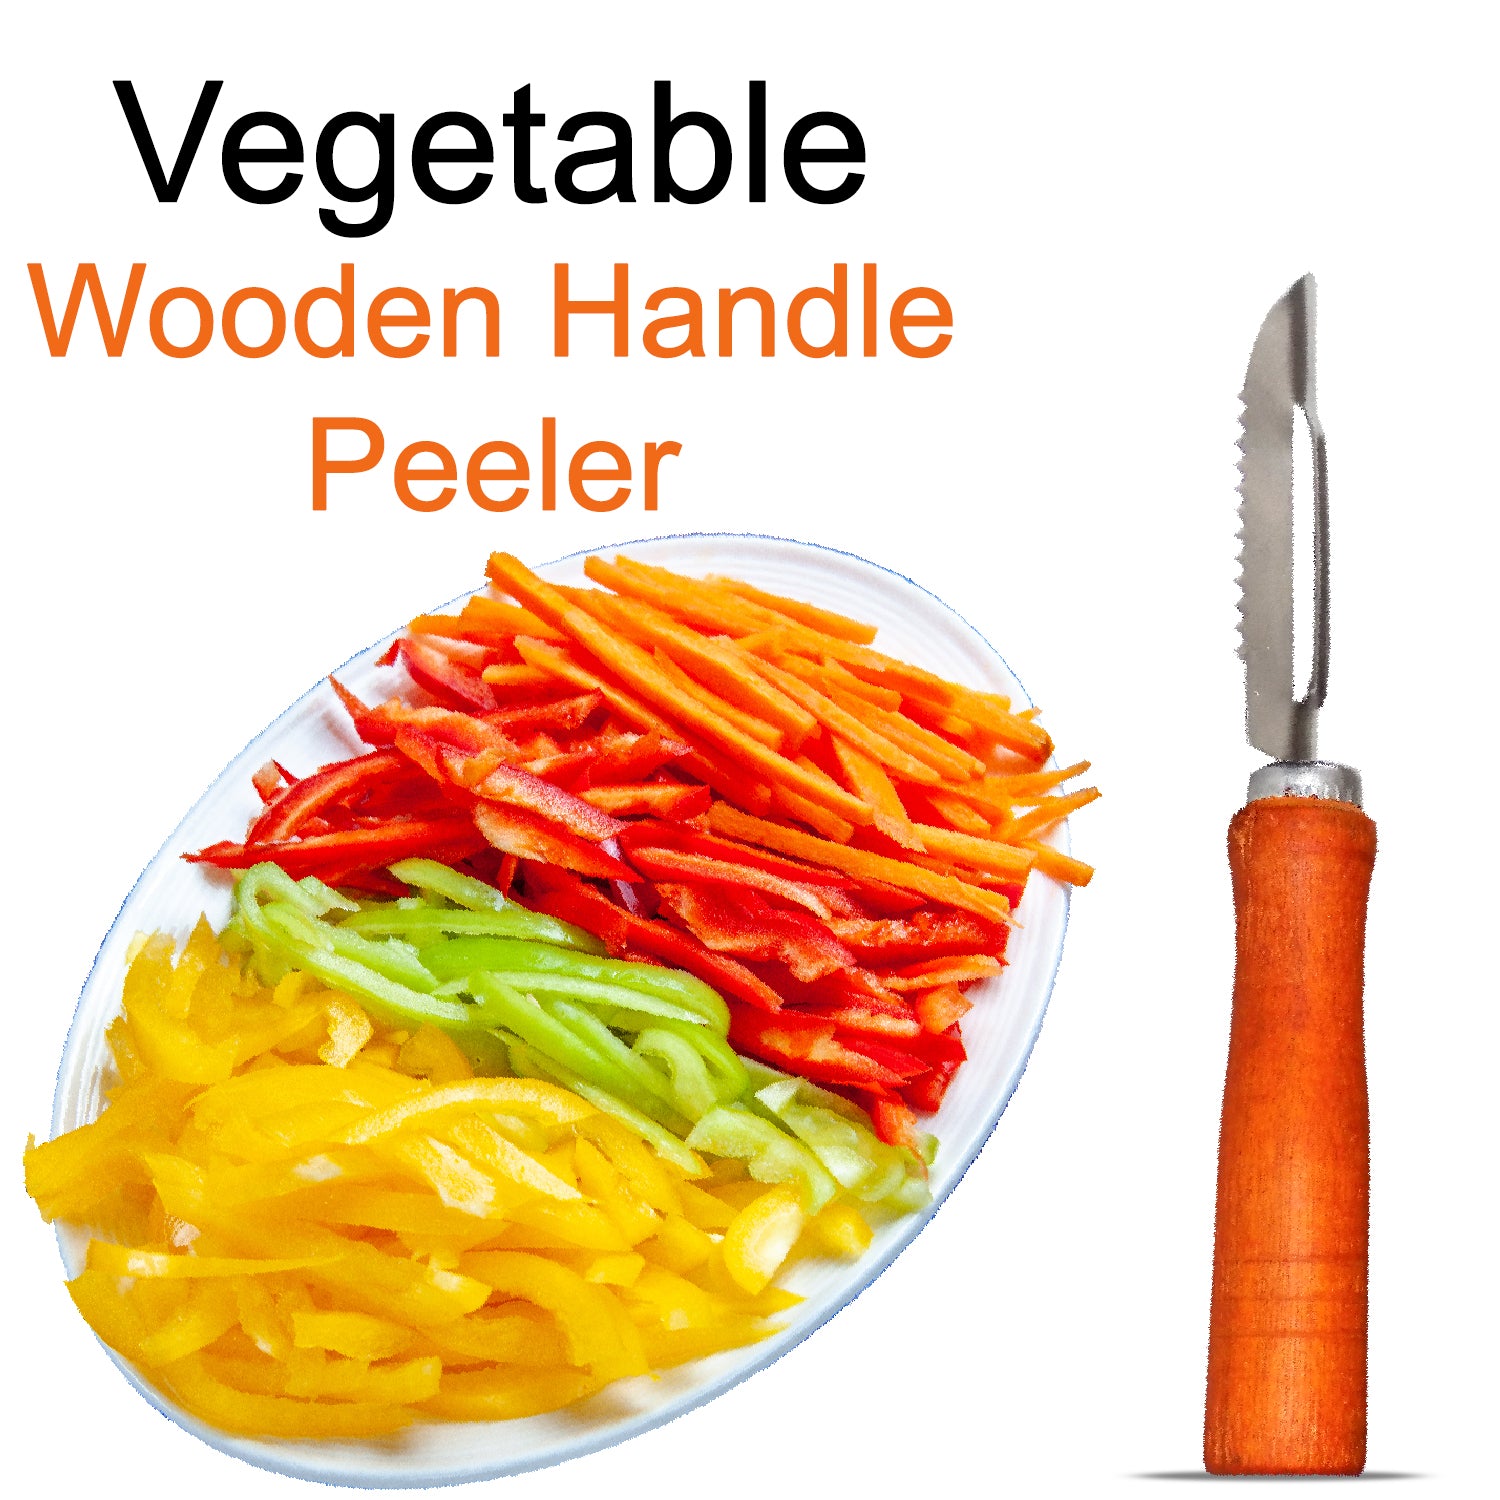 2455 Wooden Handle and Stainless Steel Vegetable Peeler - China, 0.042 kgs